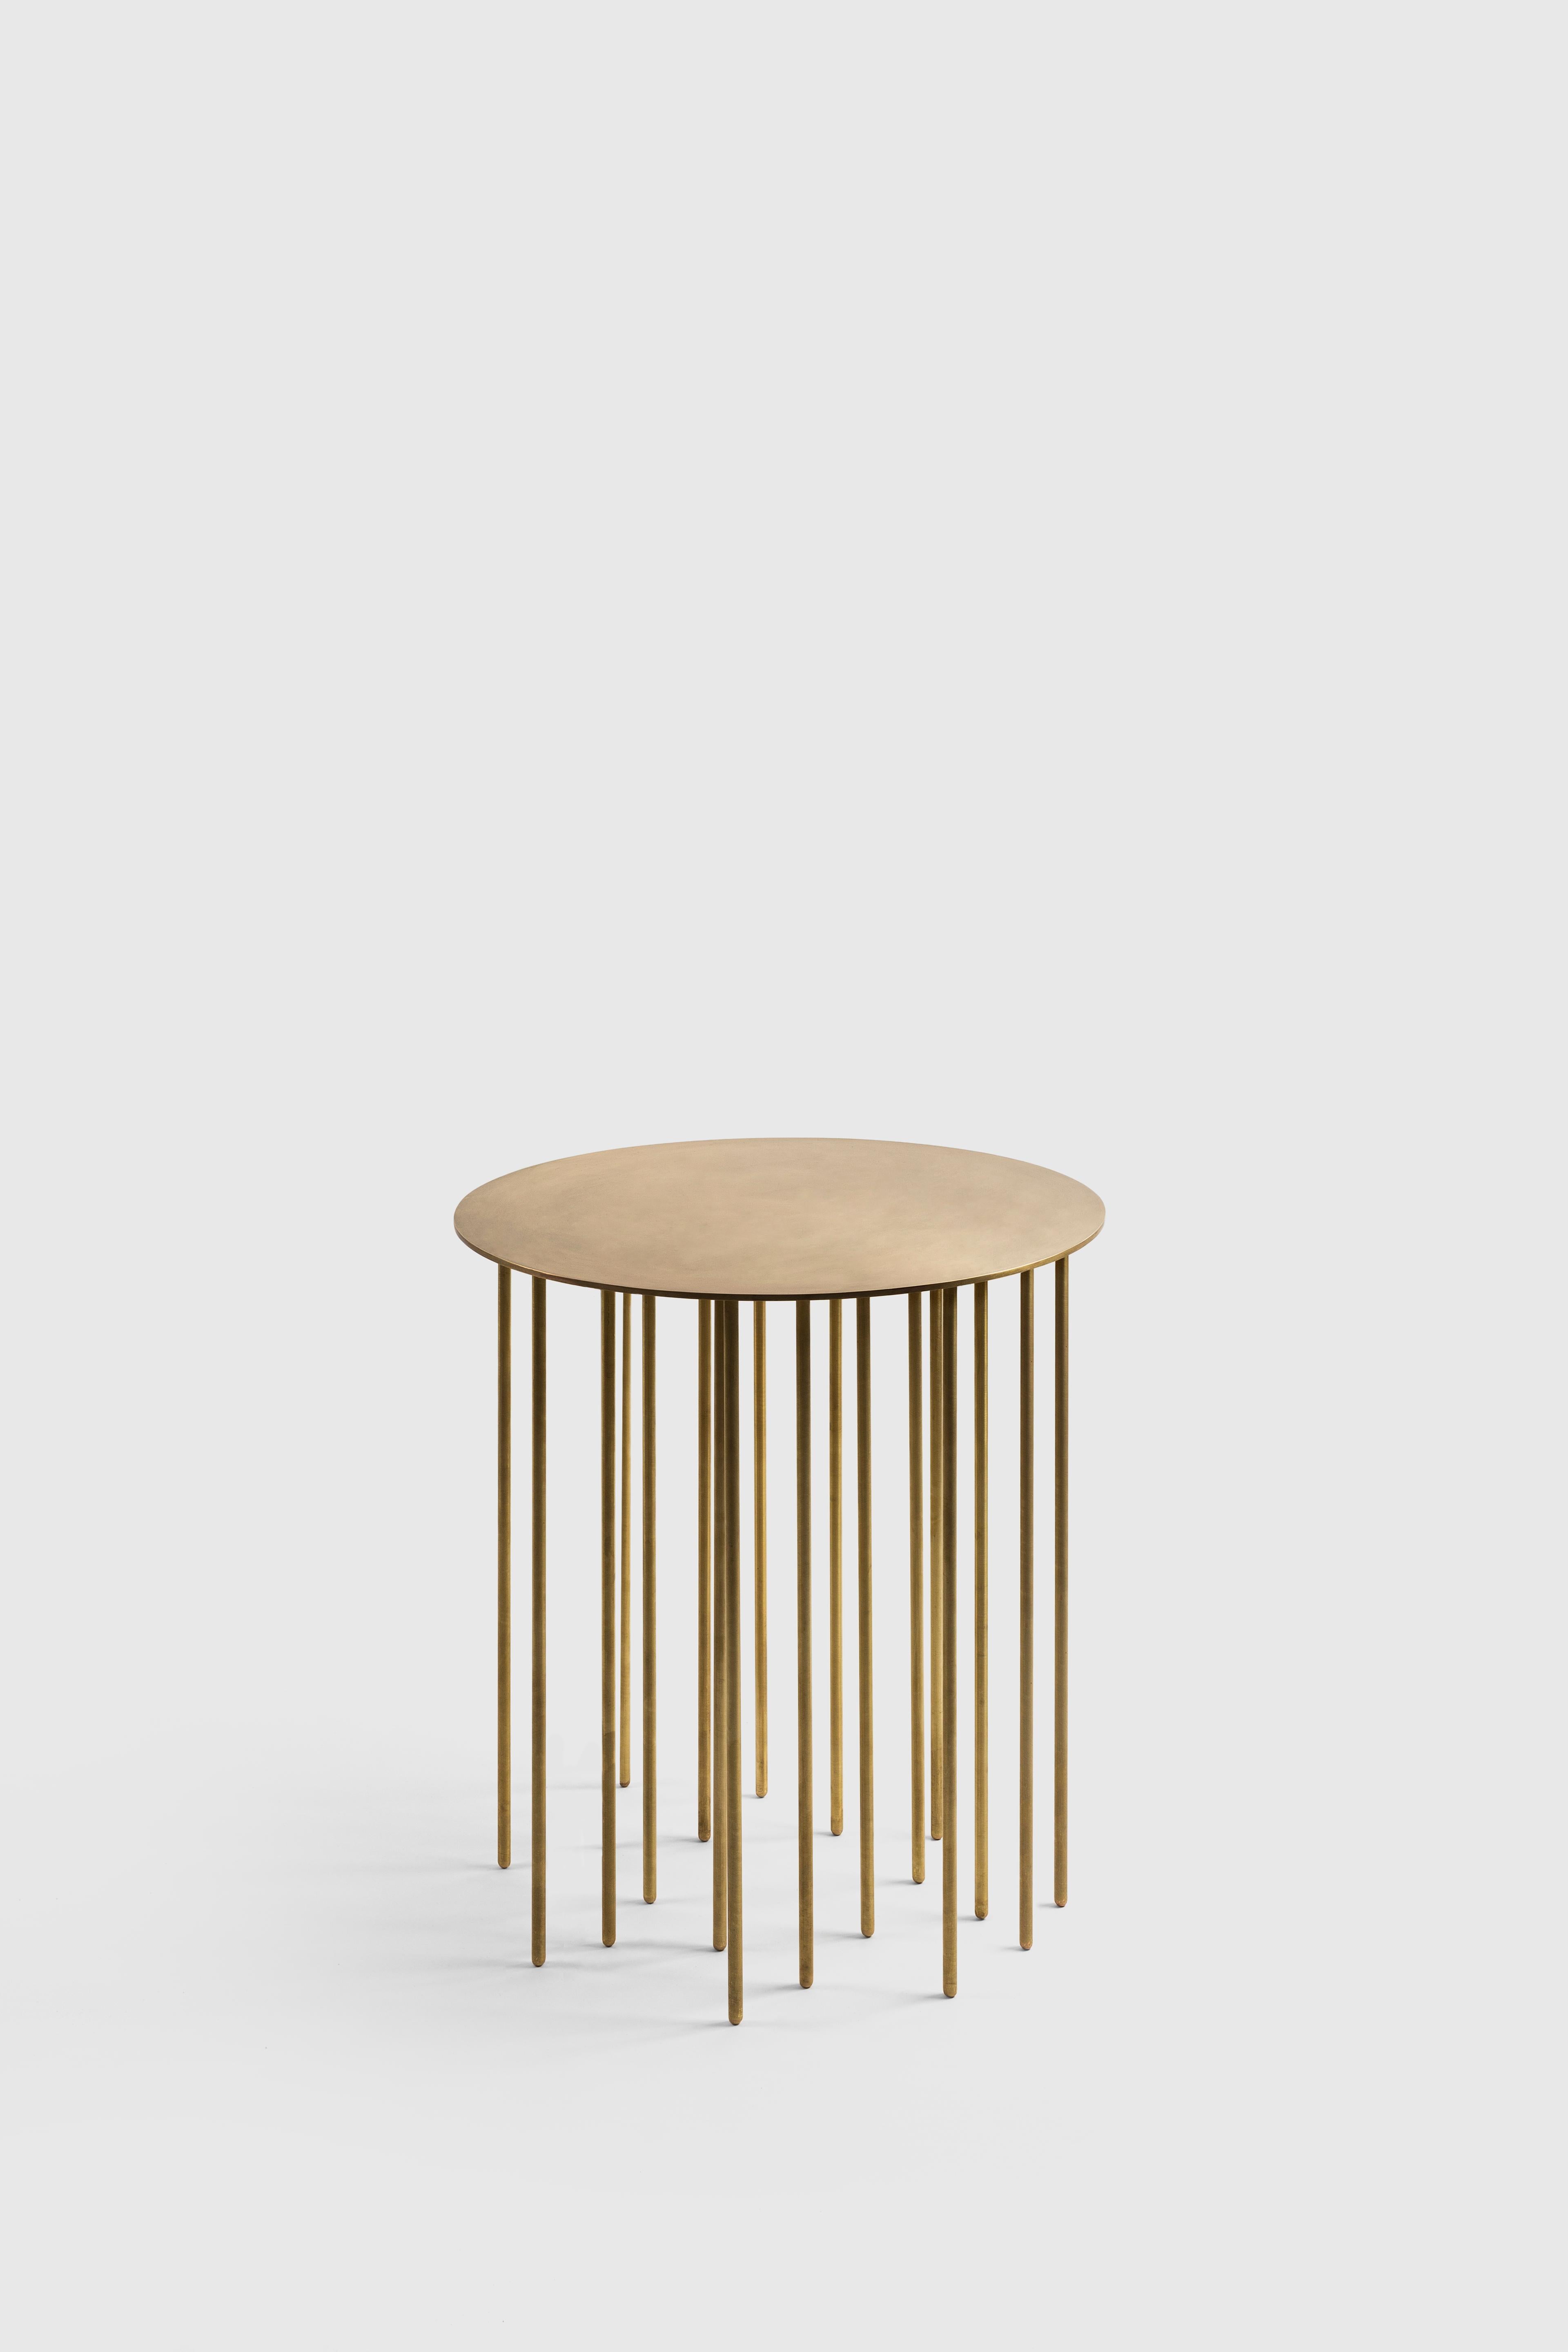 Structure Side Table by Subject Bureaux
Limited Edition
DImensions: ? 45 x H 49 cm
Materials: Brass, Waxed Satin.

The Structure Side Table is an homage to the unseen, and for the most part, unknown forces that keep almost all - foundations.